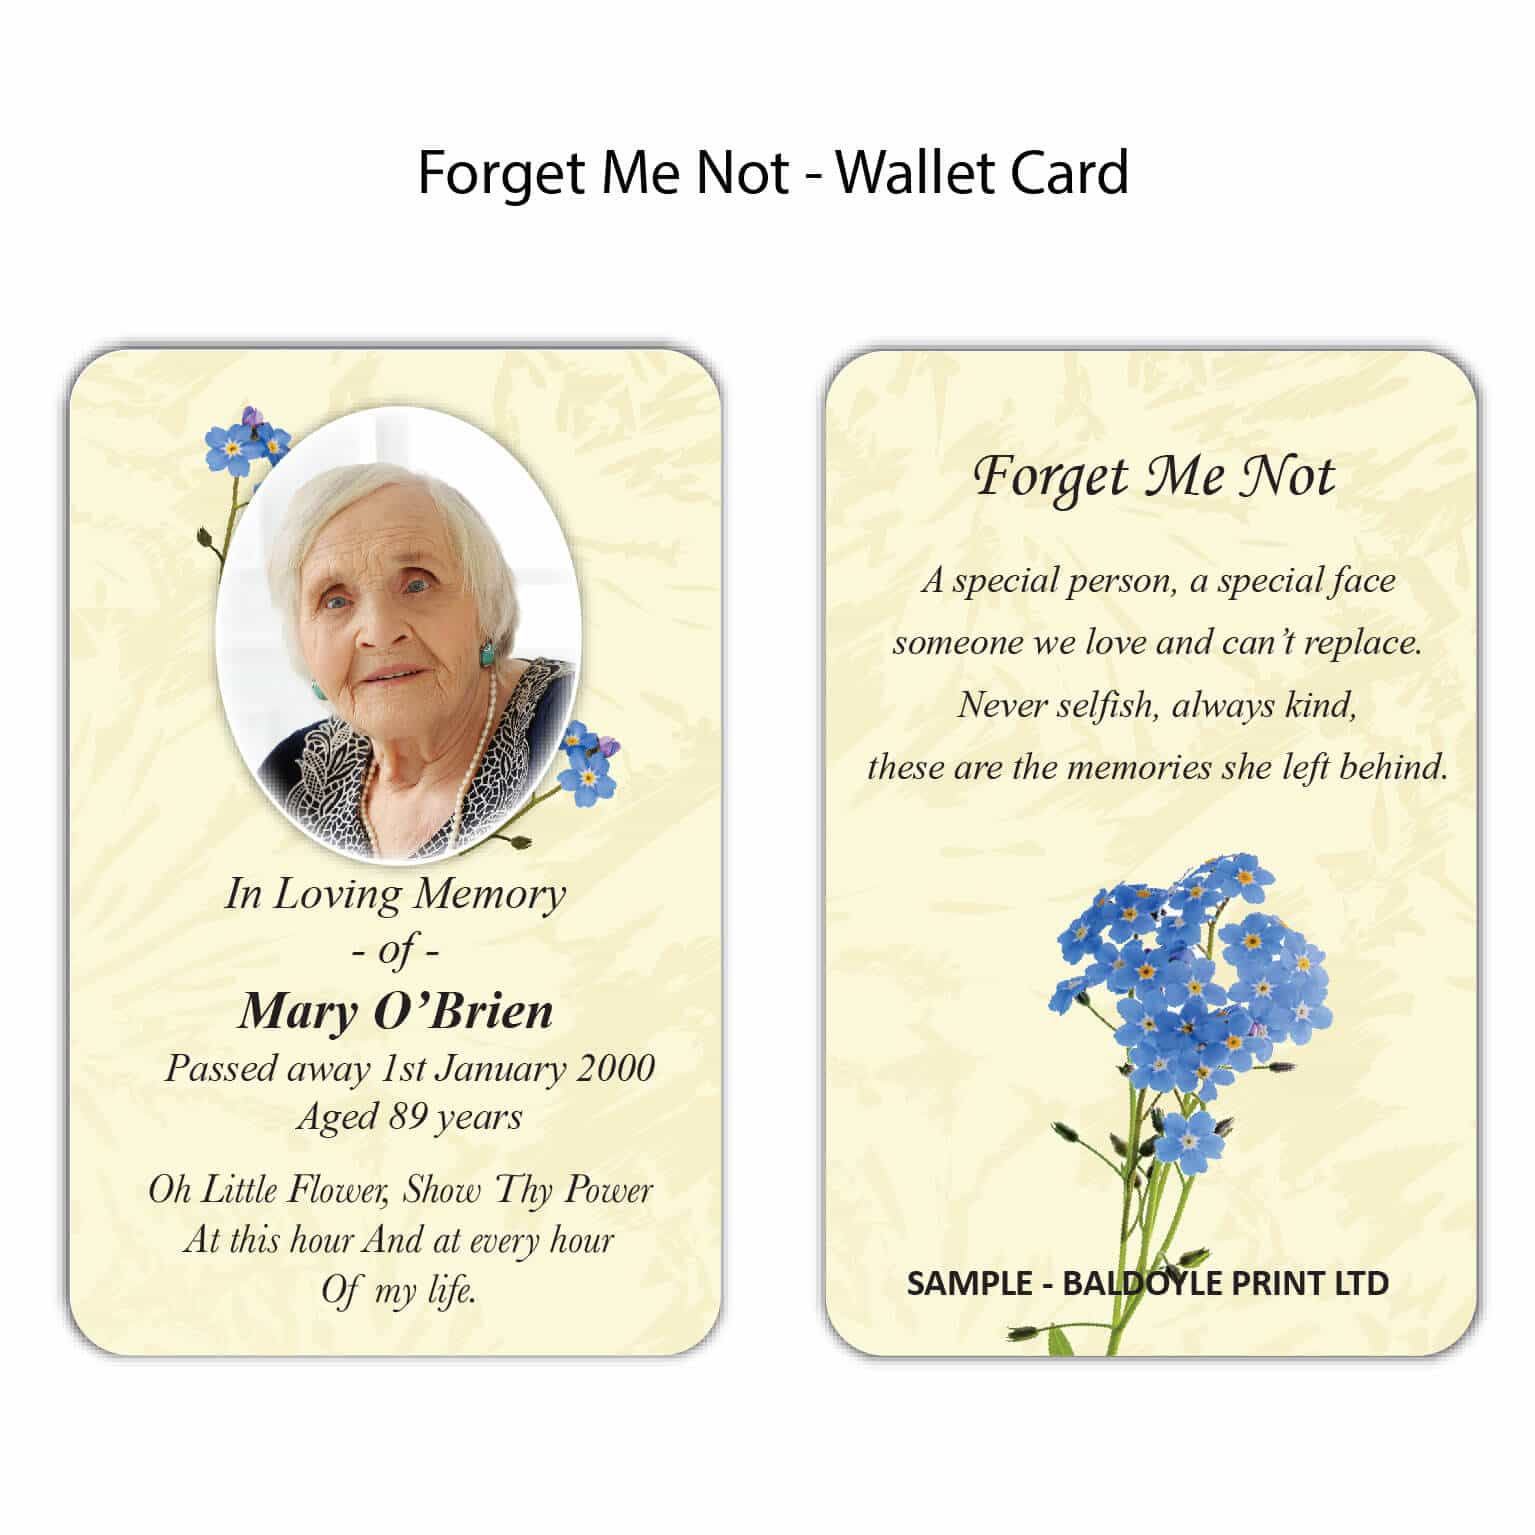 Forget Me Not Wallet Cards